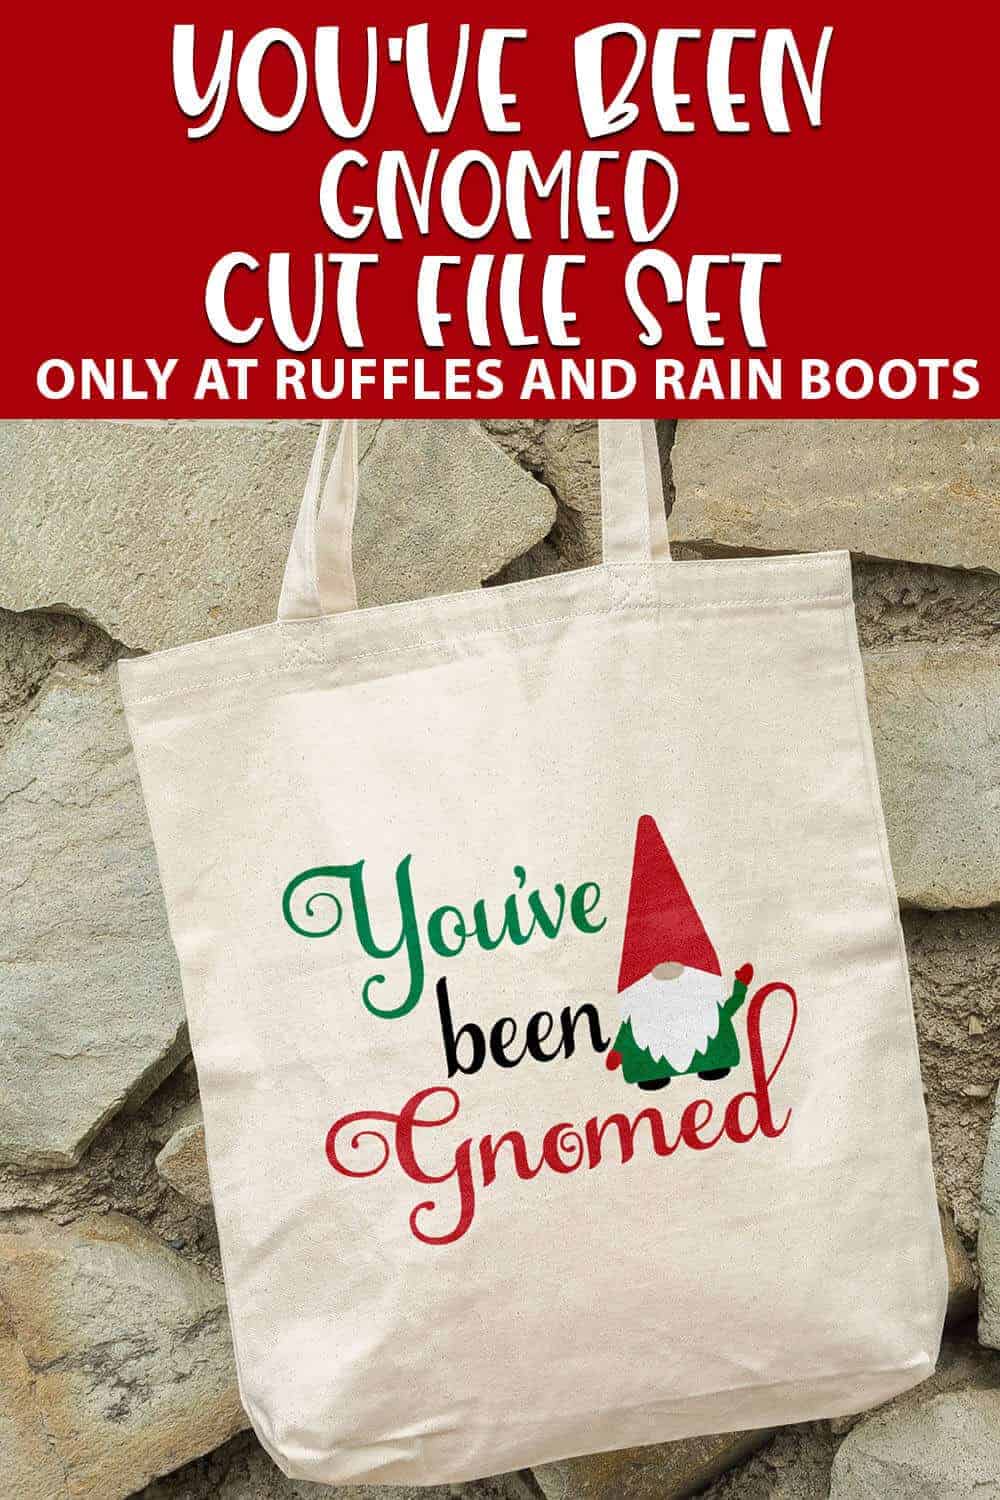 canvas bag featuring you've been gnomed design with text which reads you've been gnomed cut file set